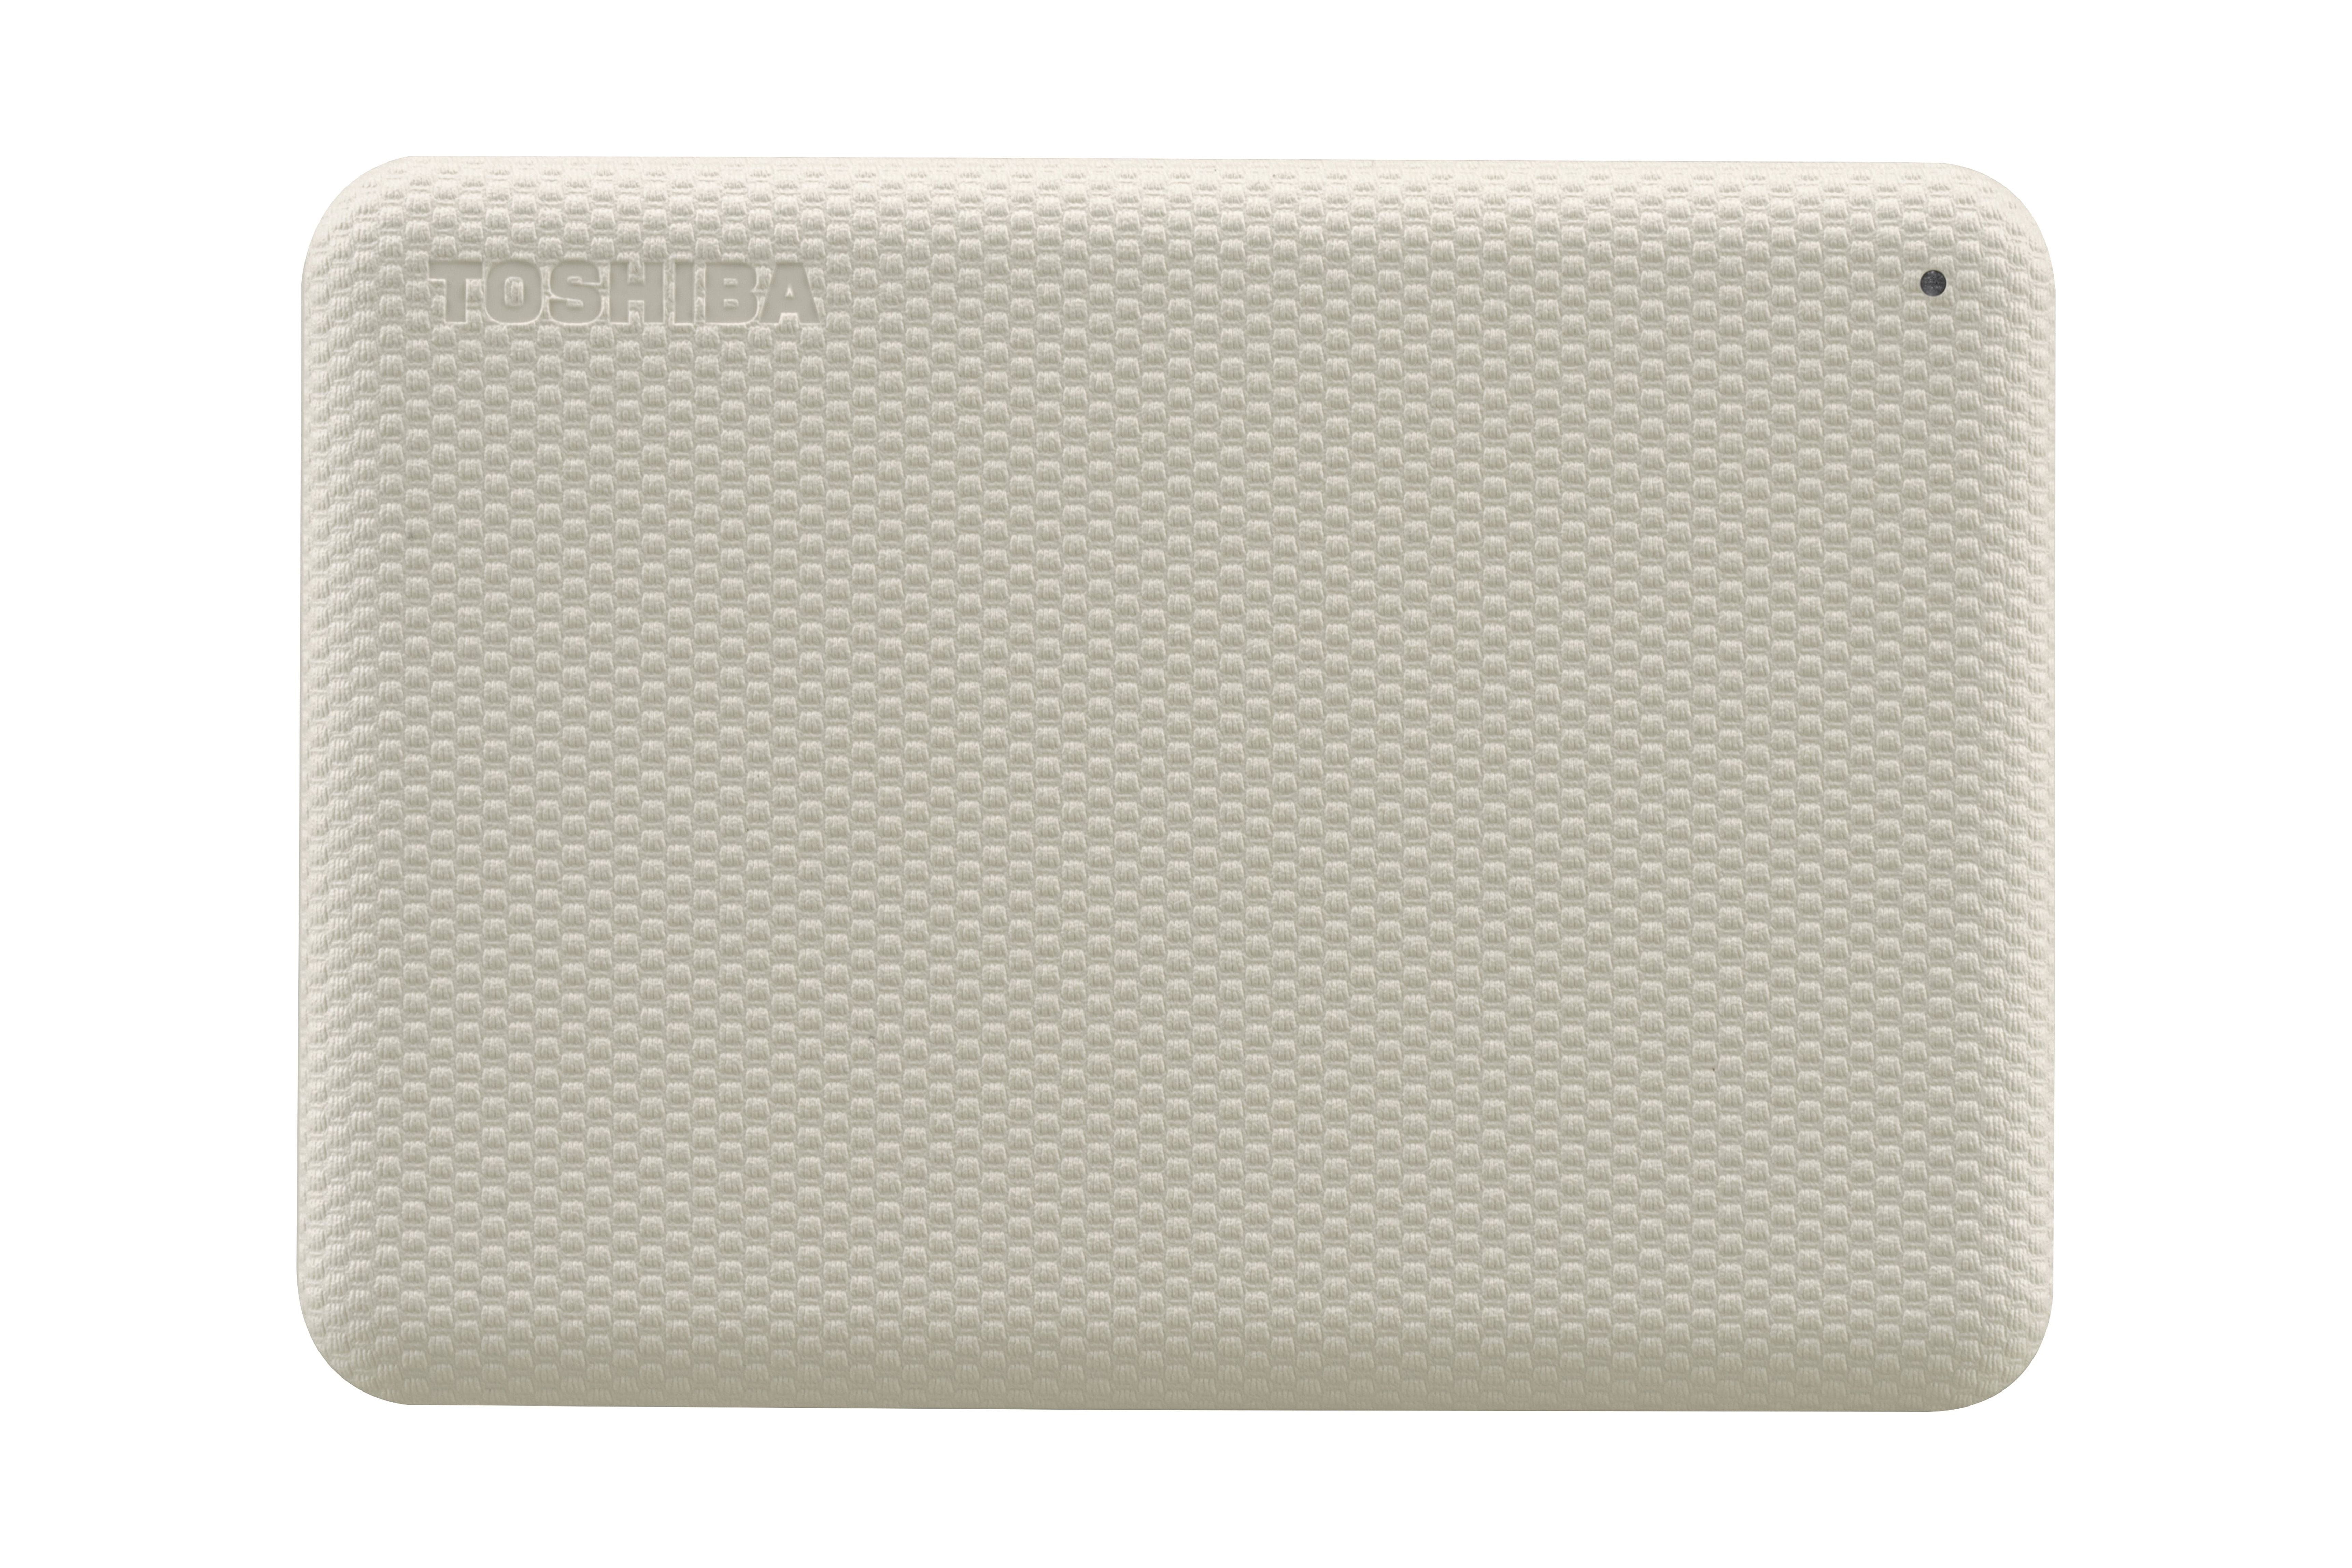 Toshiba CANVIO Advance Plus - both White USB-A Hard External - Drive 3.0 2TB Portable (Includes USB and Cables) USB-C